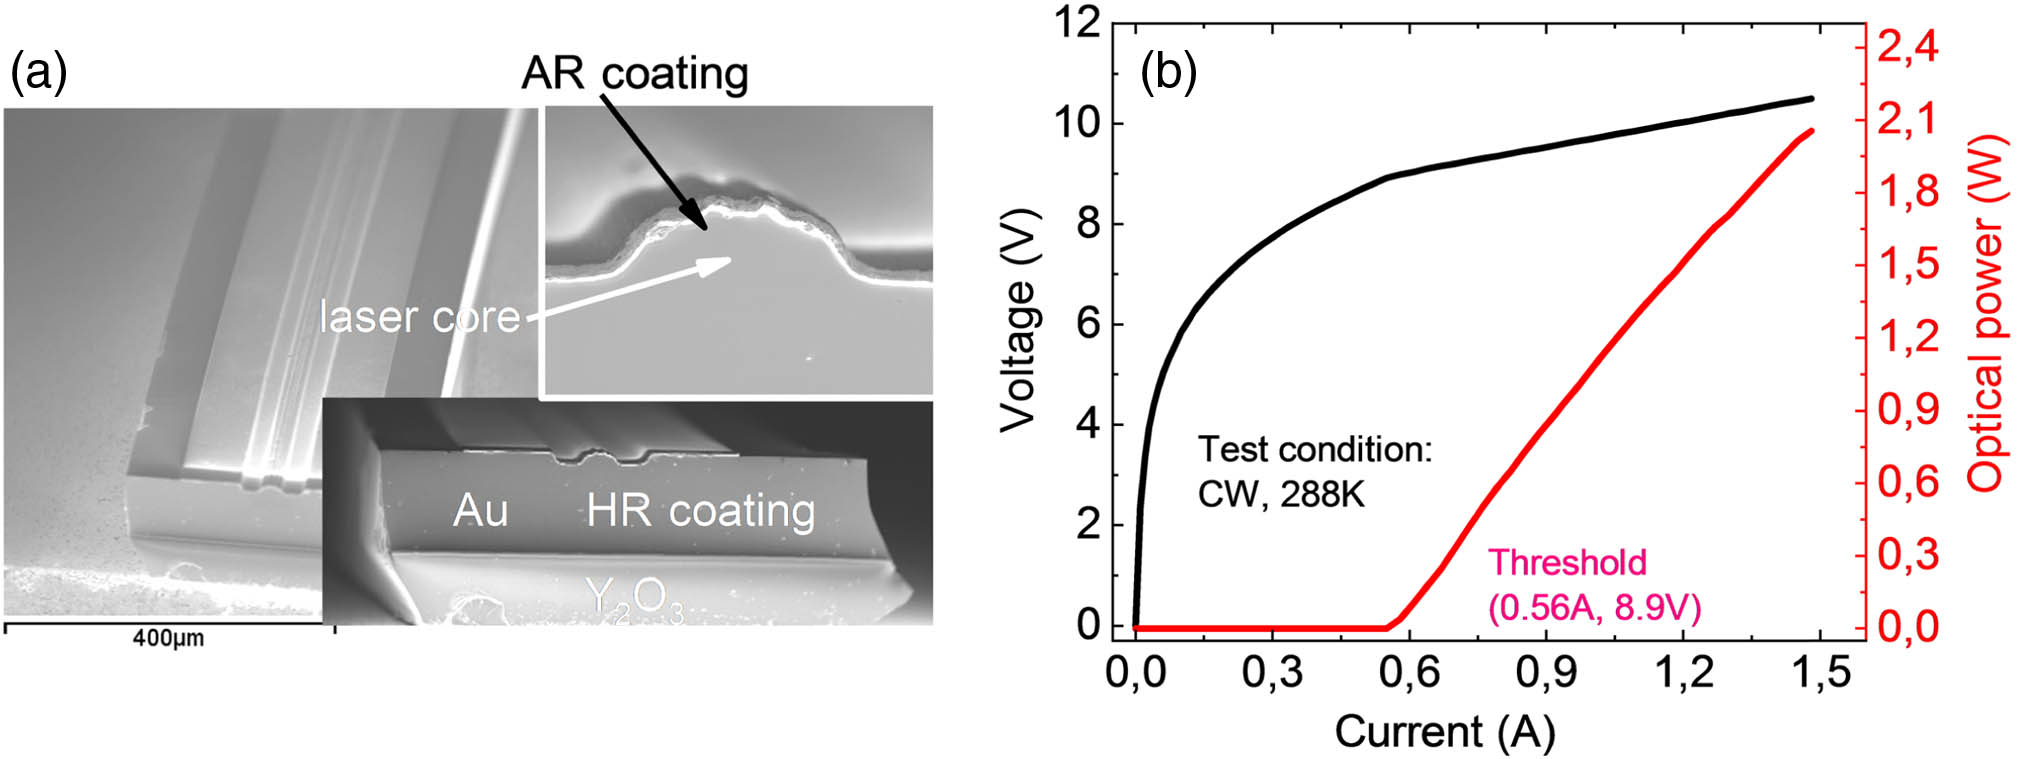 (a) The scanning electron microscopy (SEM) image of the QCL device and its HR coated and AR coated facets. (b) Light-current-voltage (LIV) curves of this QCL.